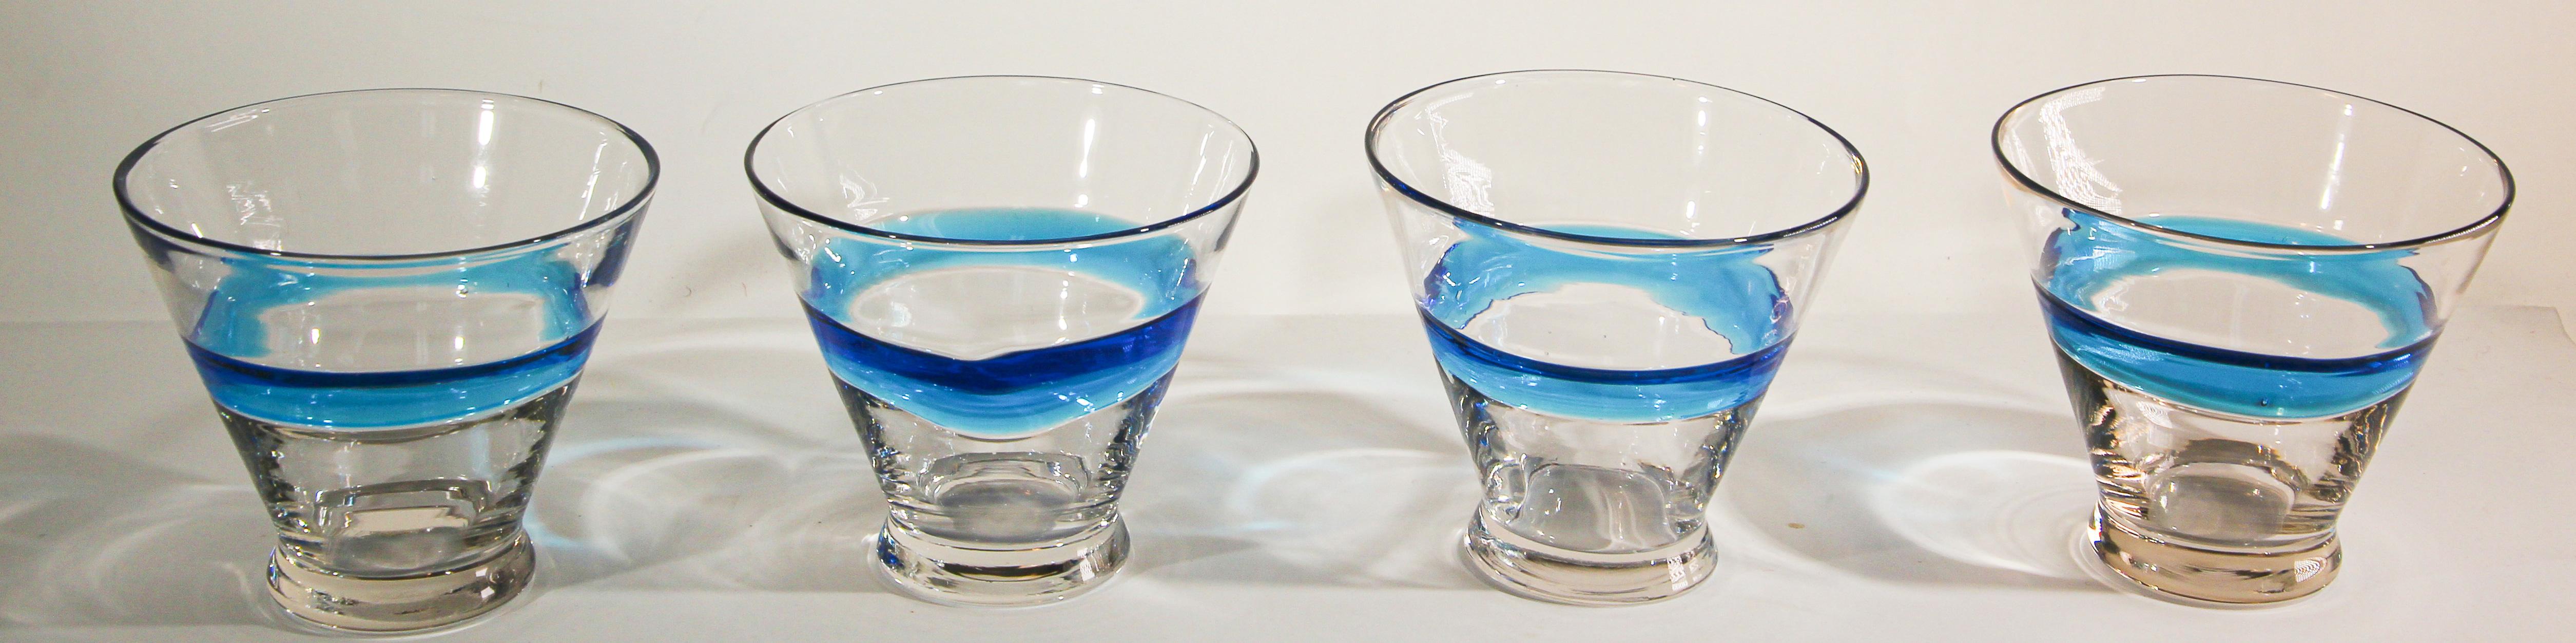 Vintage Drinking Murano Crystal Glasses Set of 4 For Sale 2